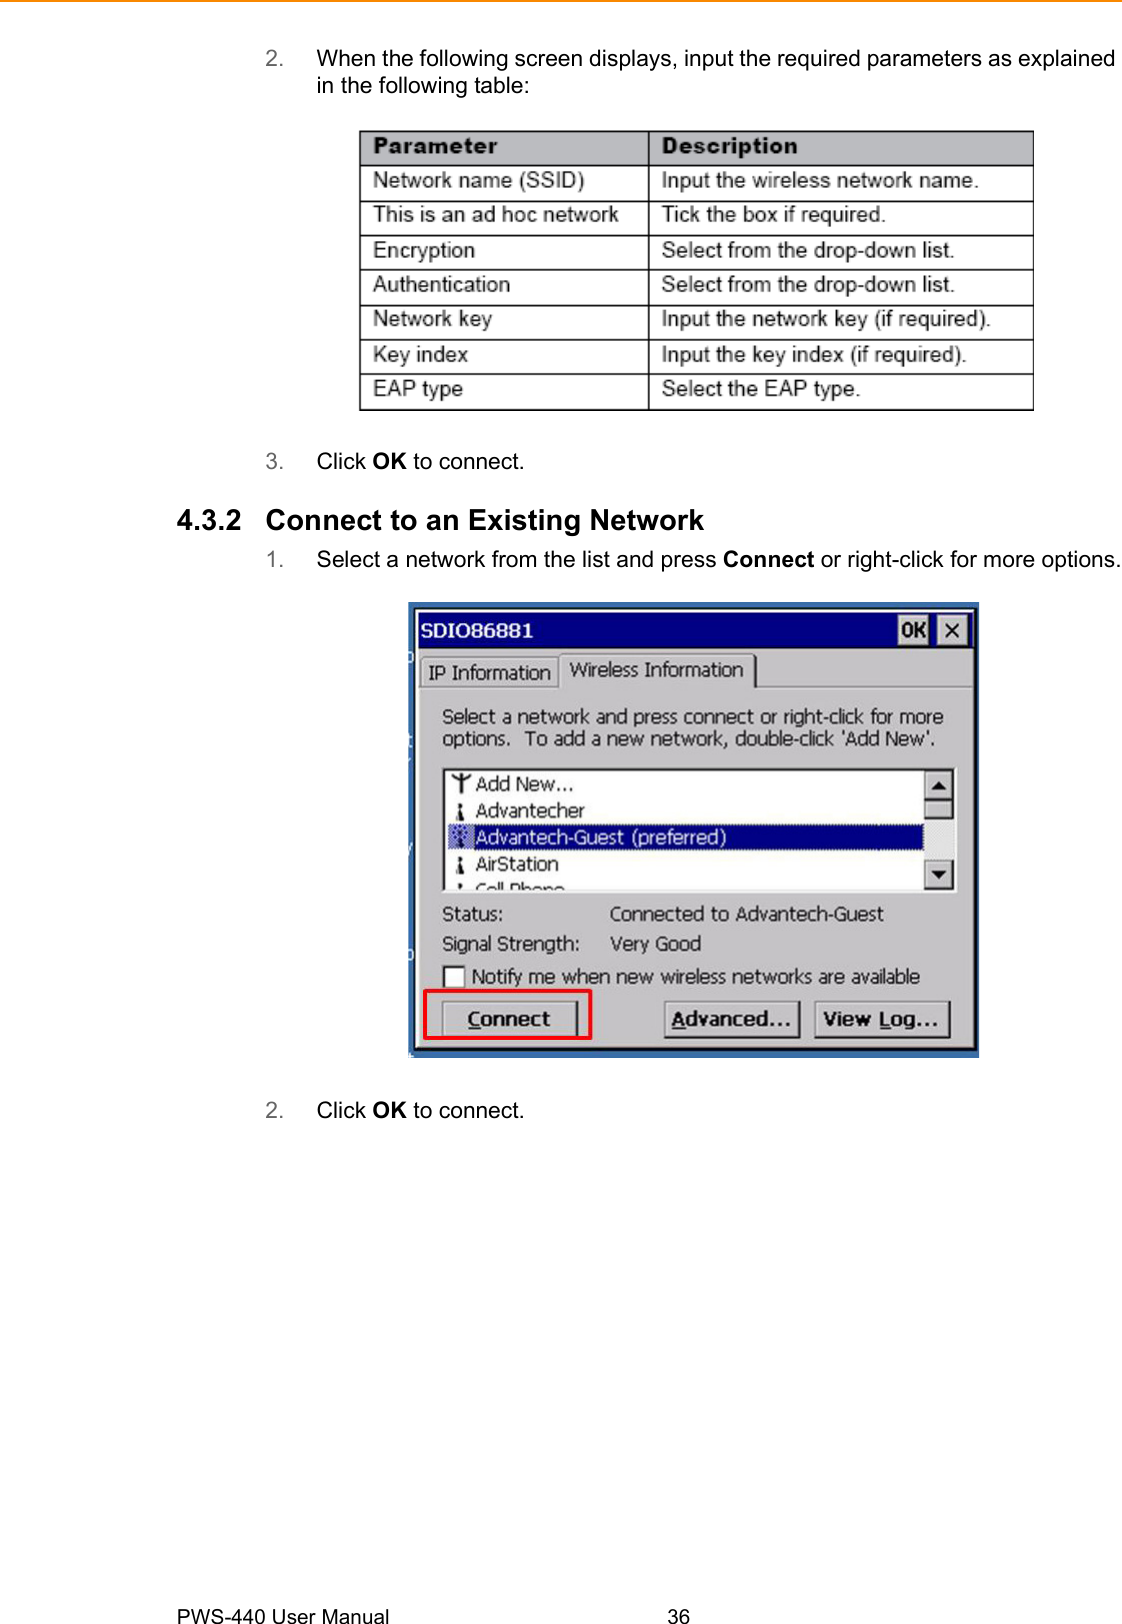 PWS-440 User Manual 362. When the following screen displays, input the required parameters as explained in the following table:3. Click OK to connect.4.3.2 Connect to an Existing Network1. Select a network from the list and press Connect or right-click for more options.2. Click OK to connect.